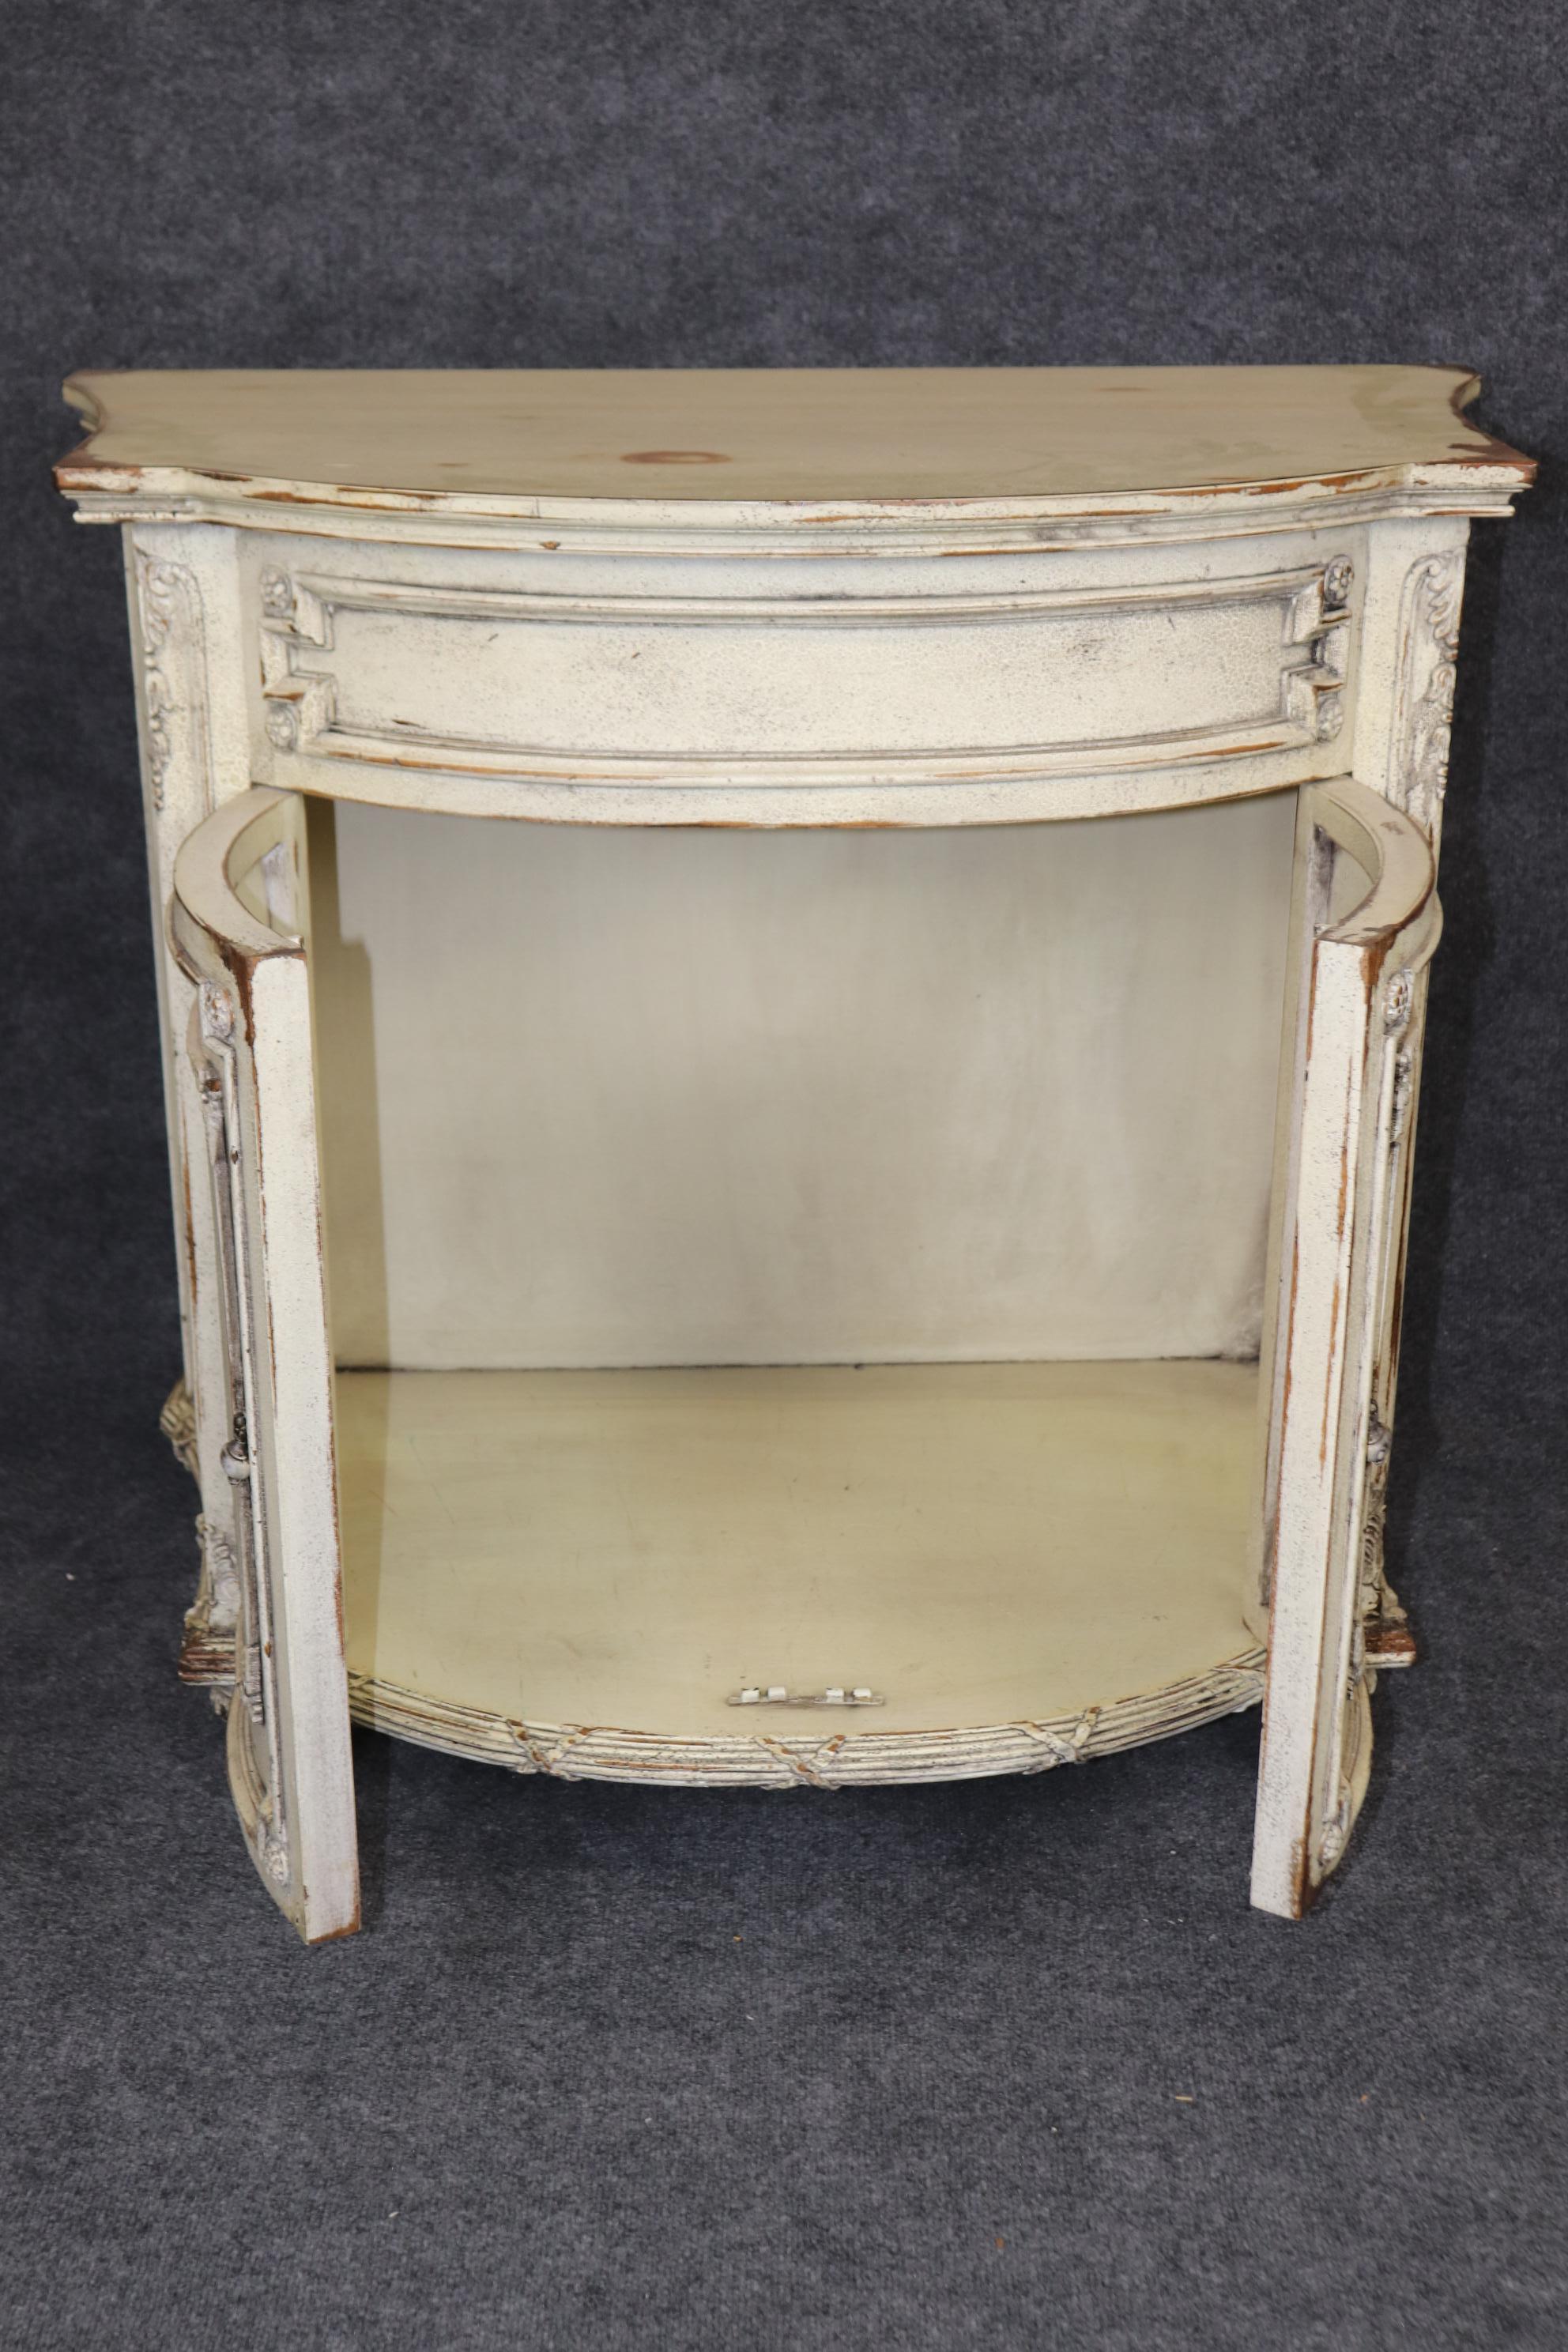 This is a beautiful pair of Habersham Plantation style heavy solid mahogany distressed side cabinets or commodes. They are designed to look like antique French pieces with fake wormholes and a distressed white painted finish. They are in good